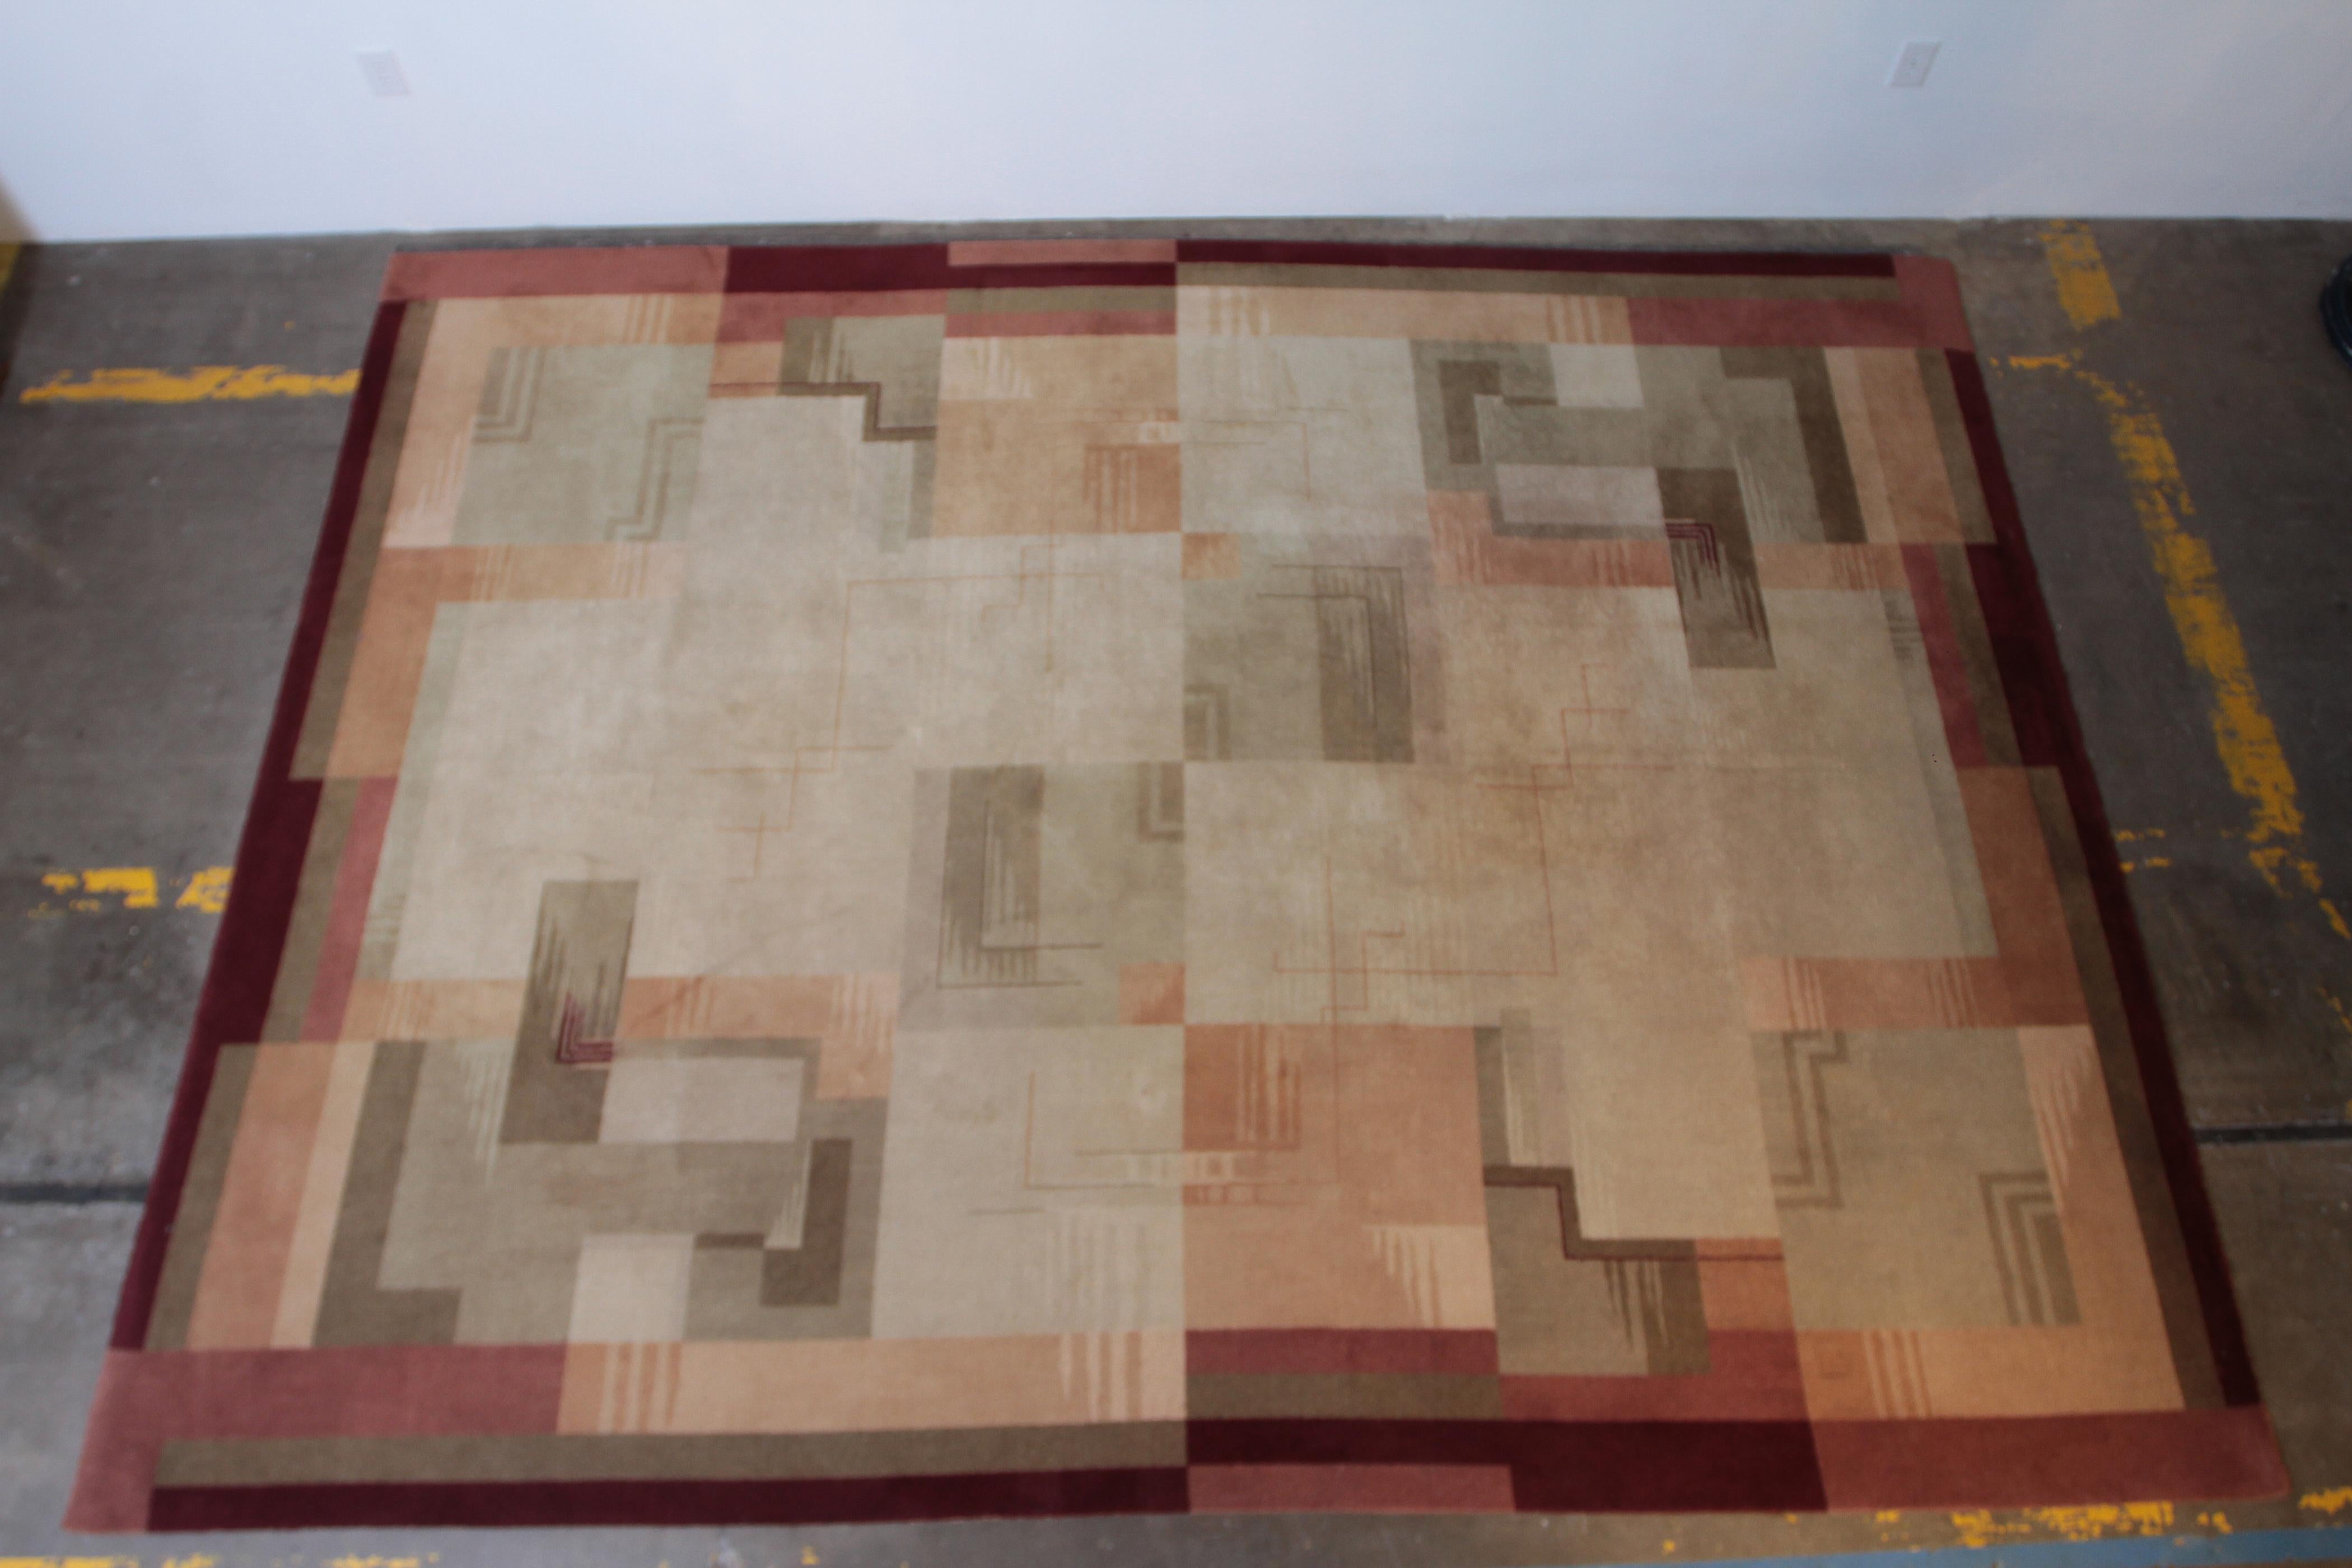 Machine age Art Deco jazz age, broadloom geometric carpet rug.

Nice original large example with good color and skyscraper geometric pattern.
Full 9' X 12' size.
Signed twice in border.
No significant issues, other than minor scattered soiling